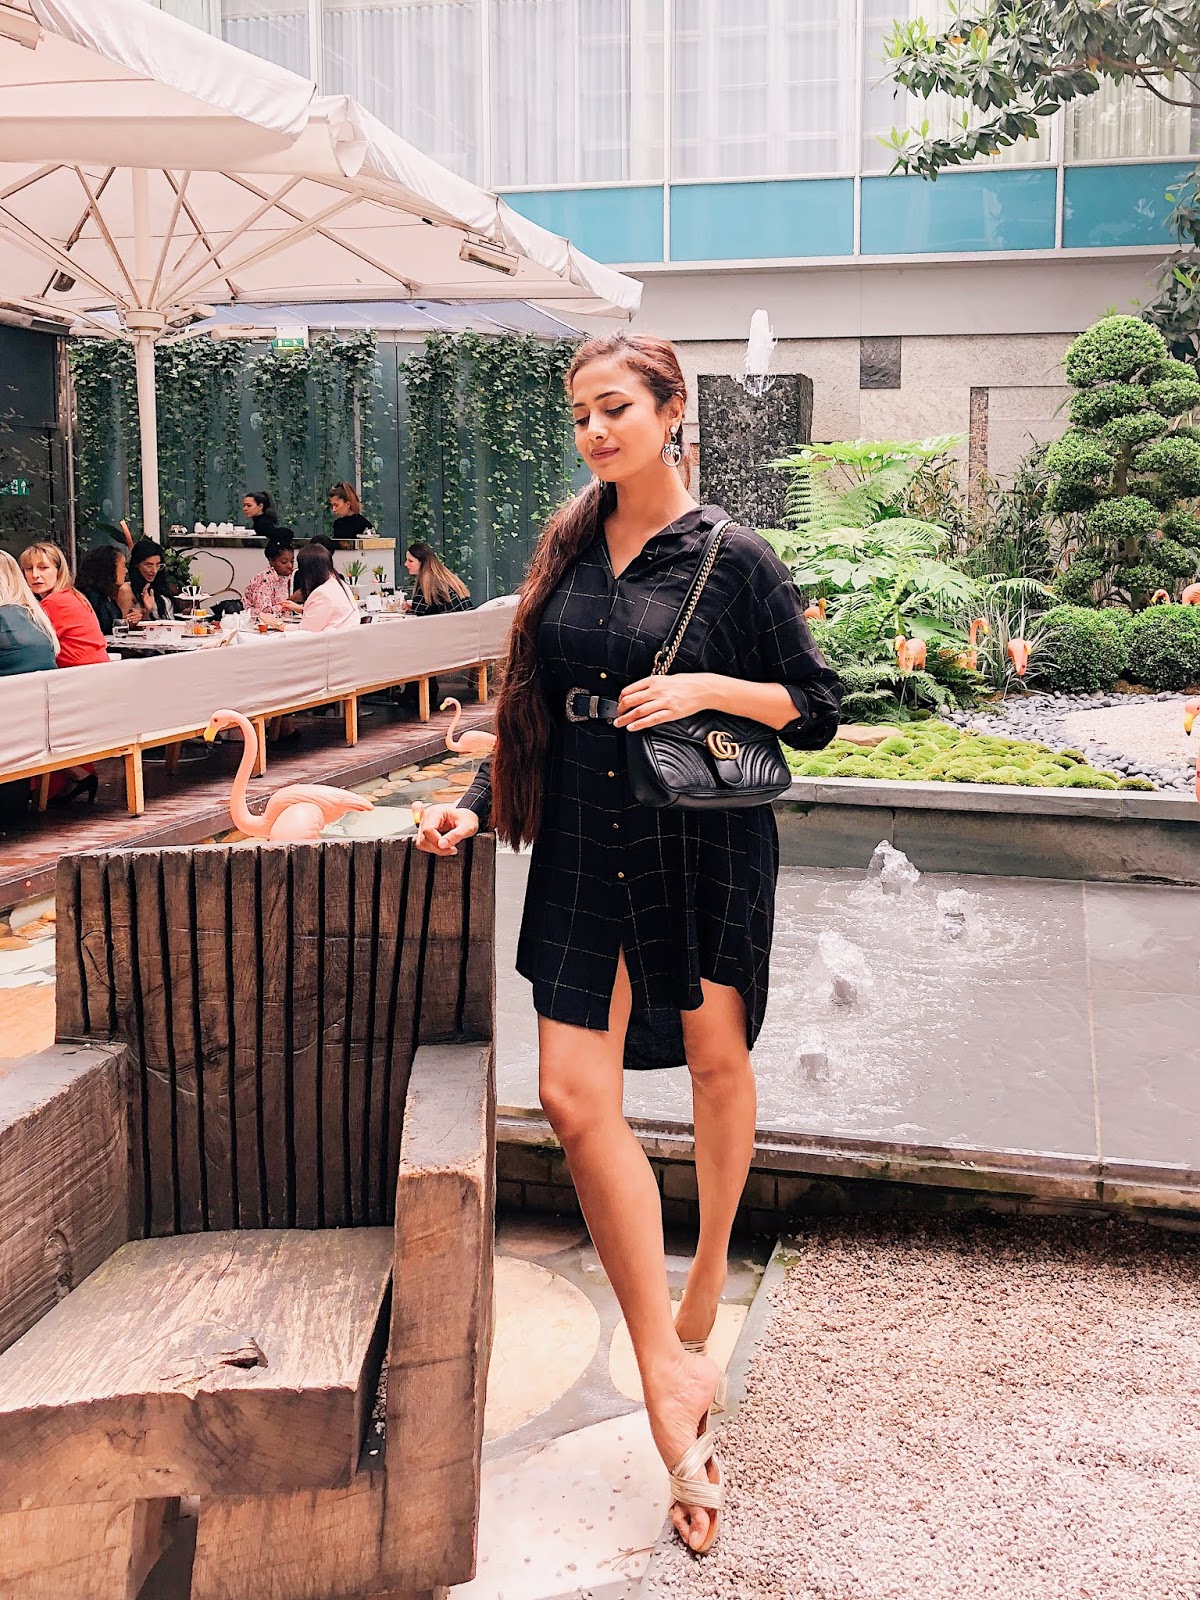 all black summer outfit, classy all black summer outfit, london street style, london blogger outfit, summer outfit, black shirt dress, gucci bag, metallic mules, indian blogger, london blog, uk blog, sanderson london, flamingoes london, instagram spot london, instagrammable places london, 